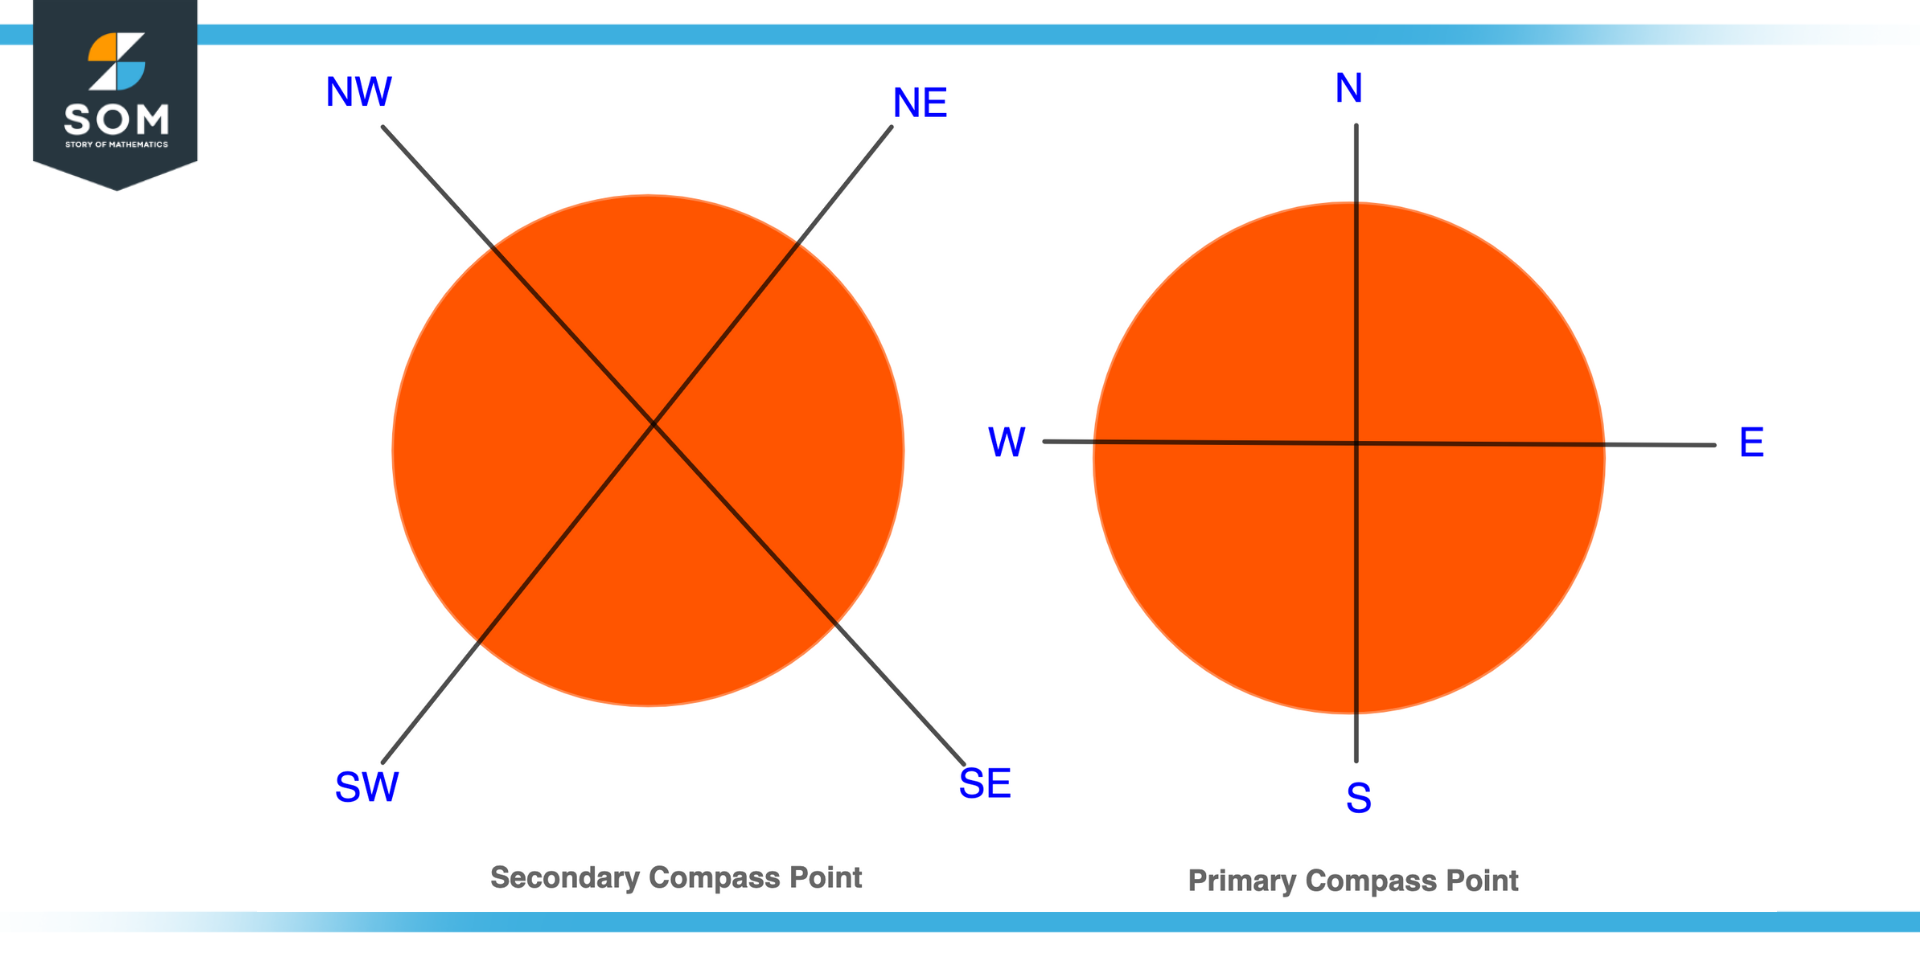 Primary and Secondary Compass Point